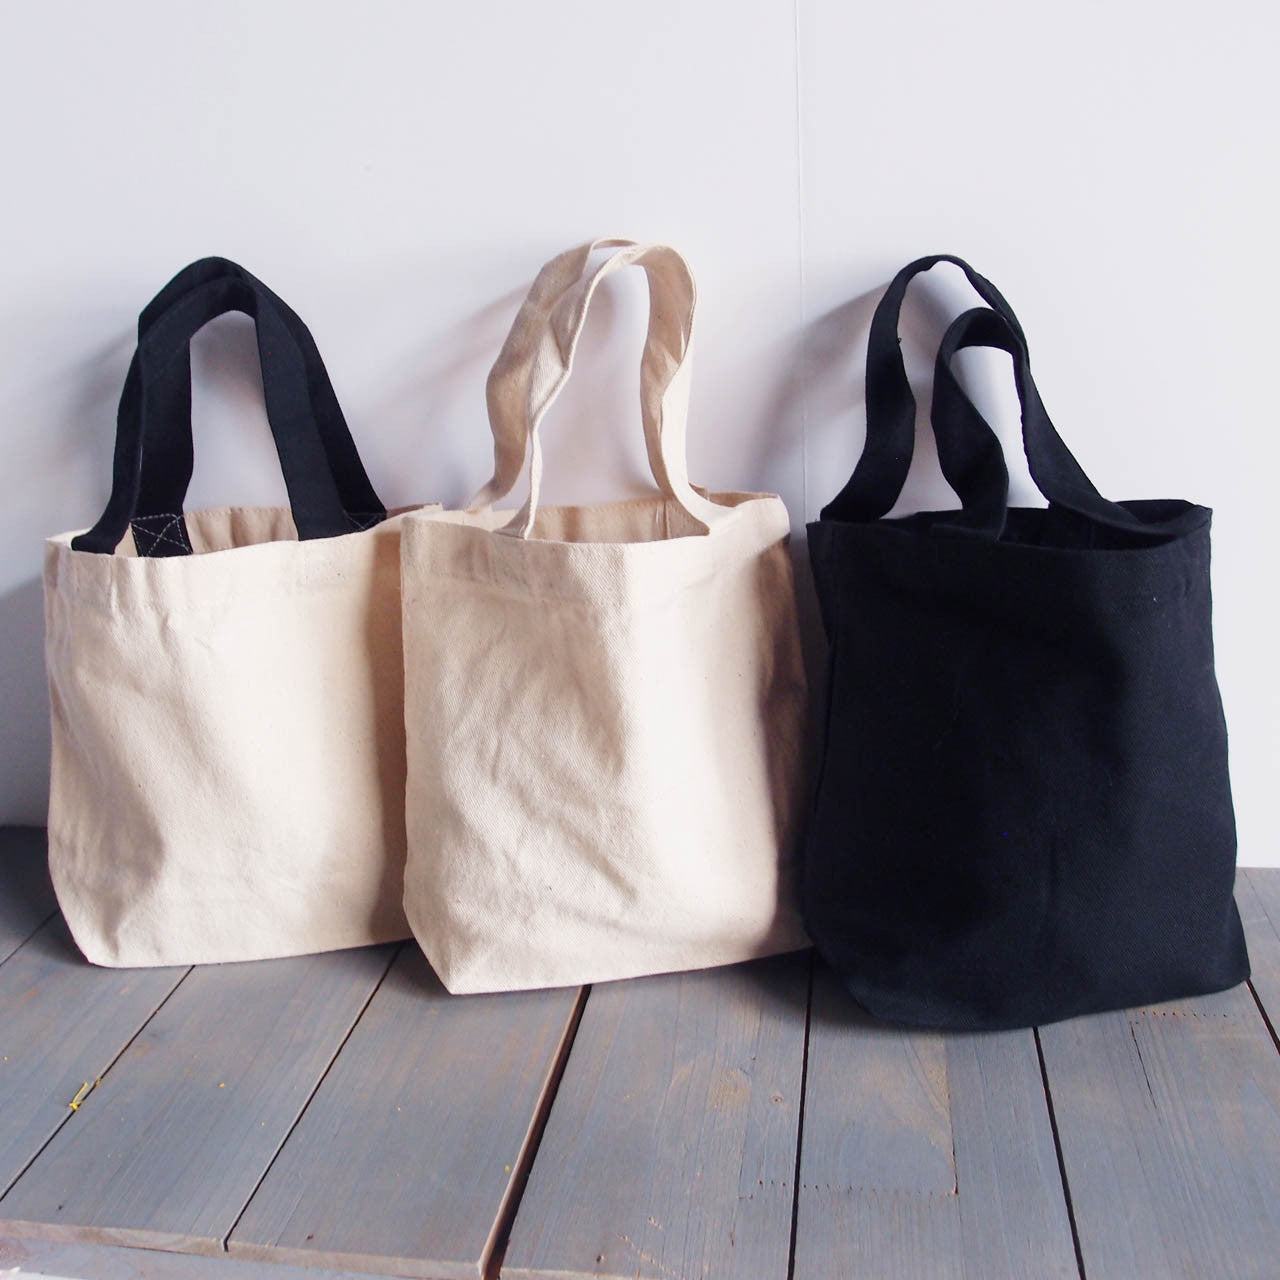 The Art of Customizing Tote Bags: Different Kinds Of Custom Tote Bags